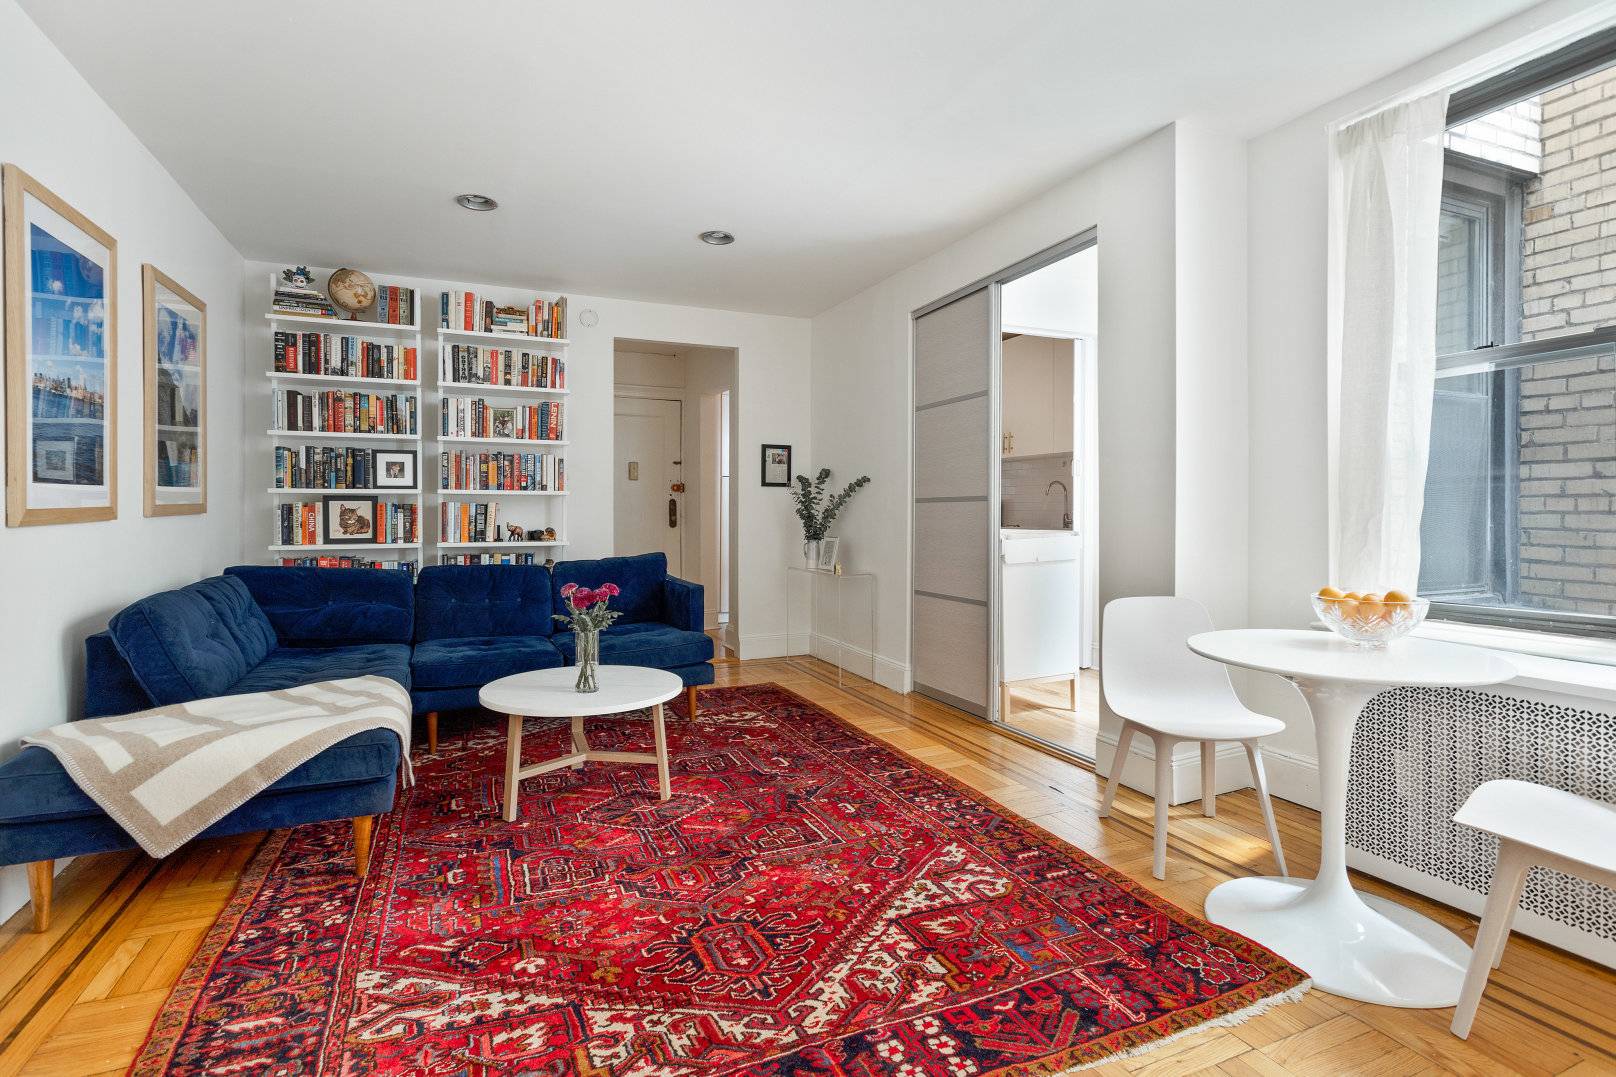 Generously sized, renovated and stylish 1 bedroom, plus home office nursery in Prime Park Slope.